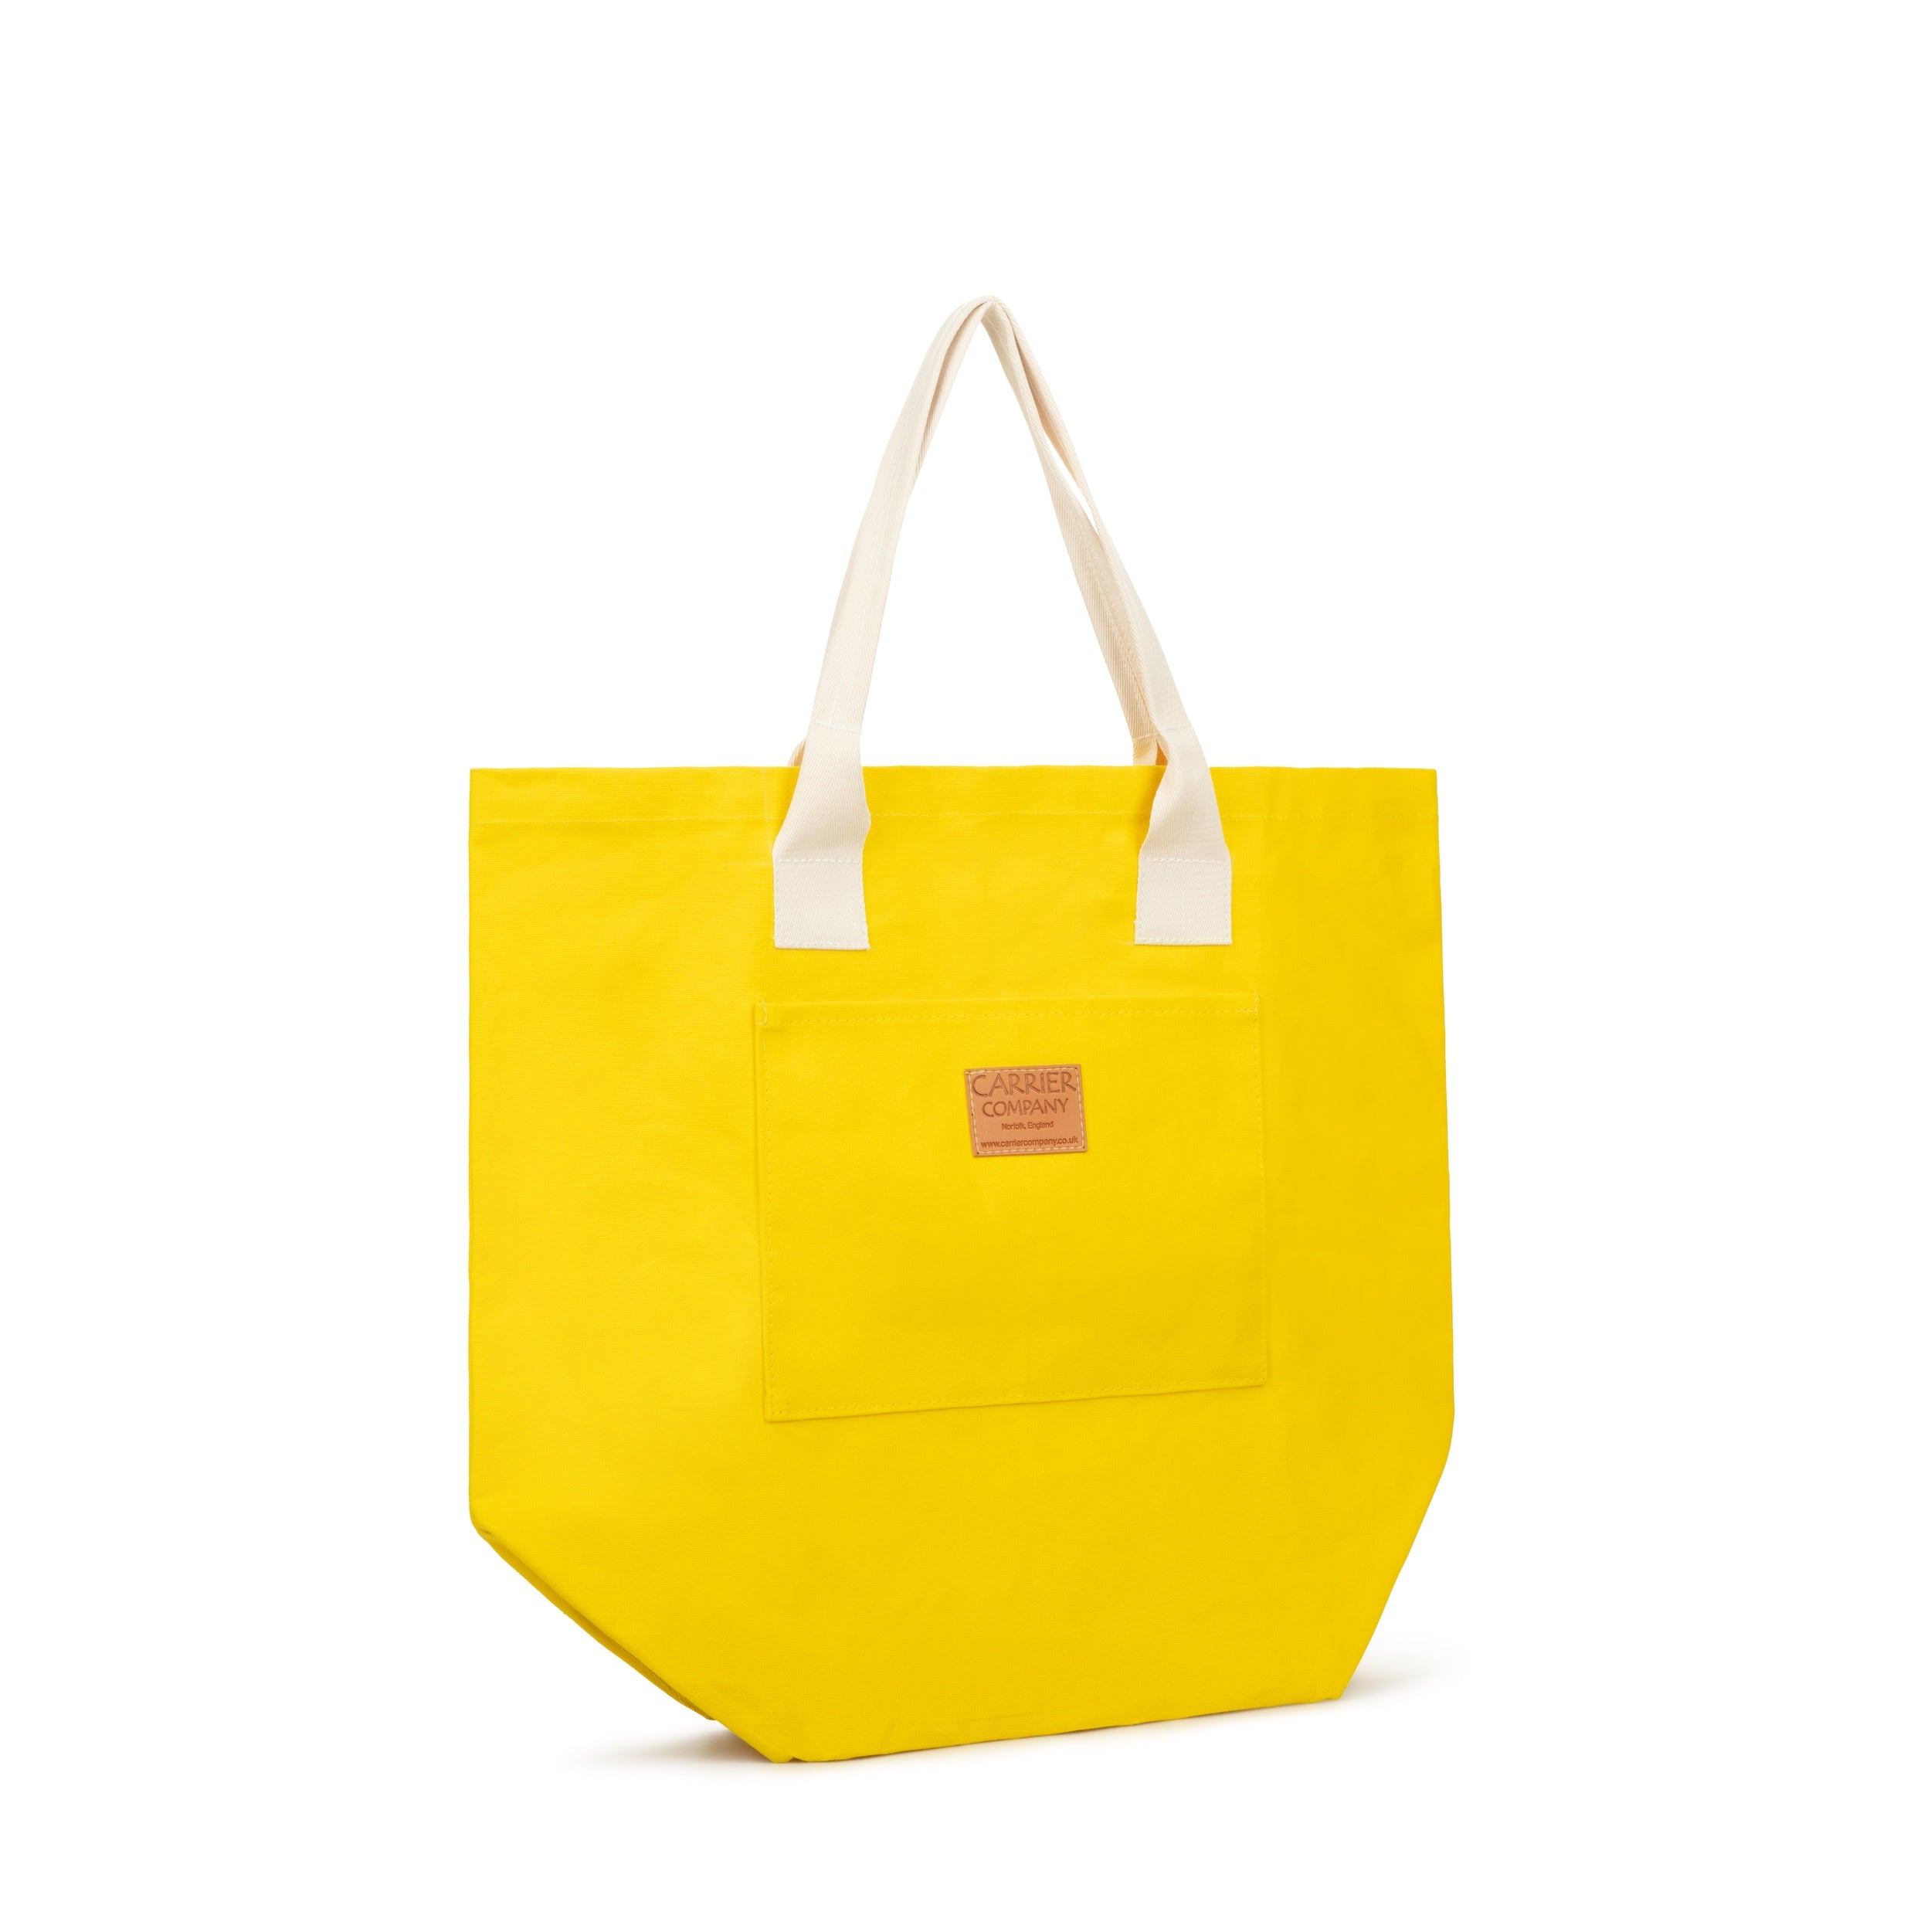 Carrier Company White Handled Beach Bag in Yellow